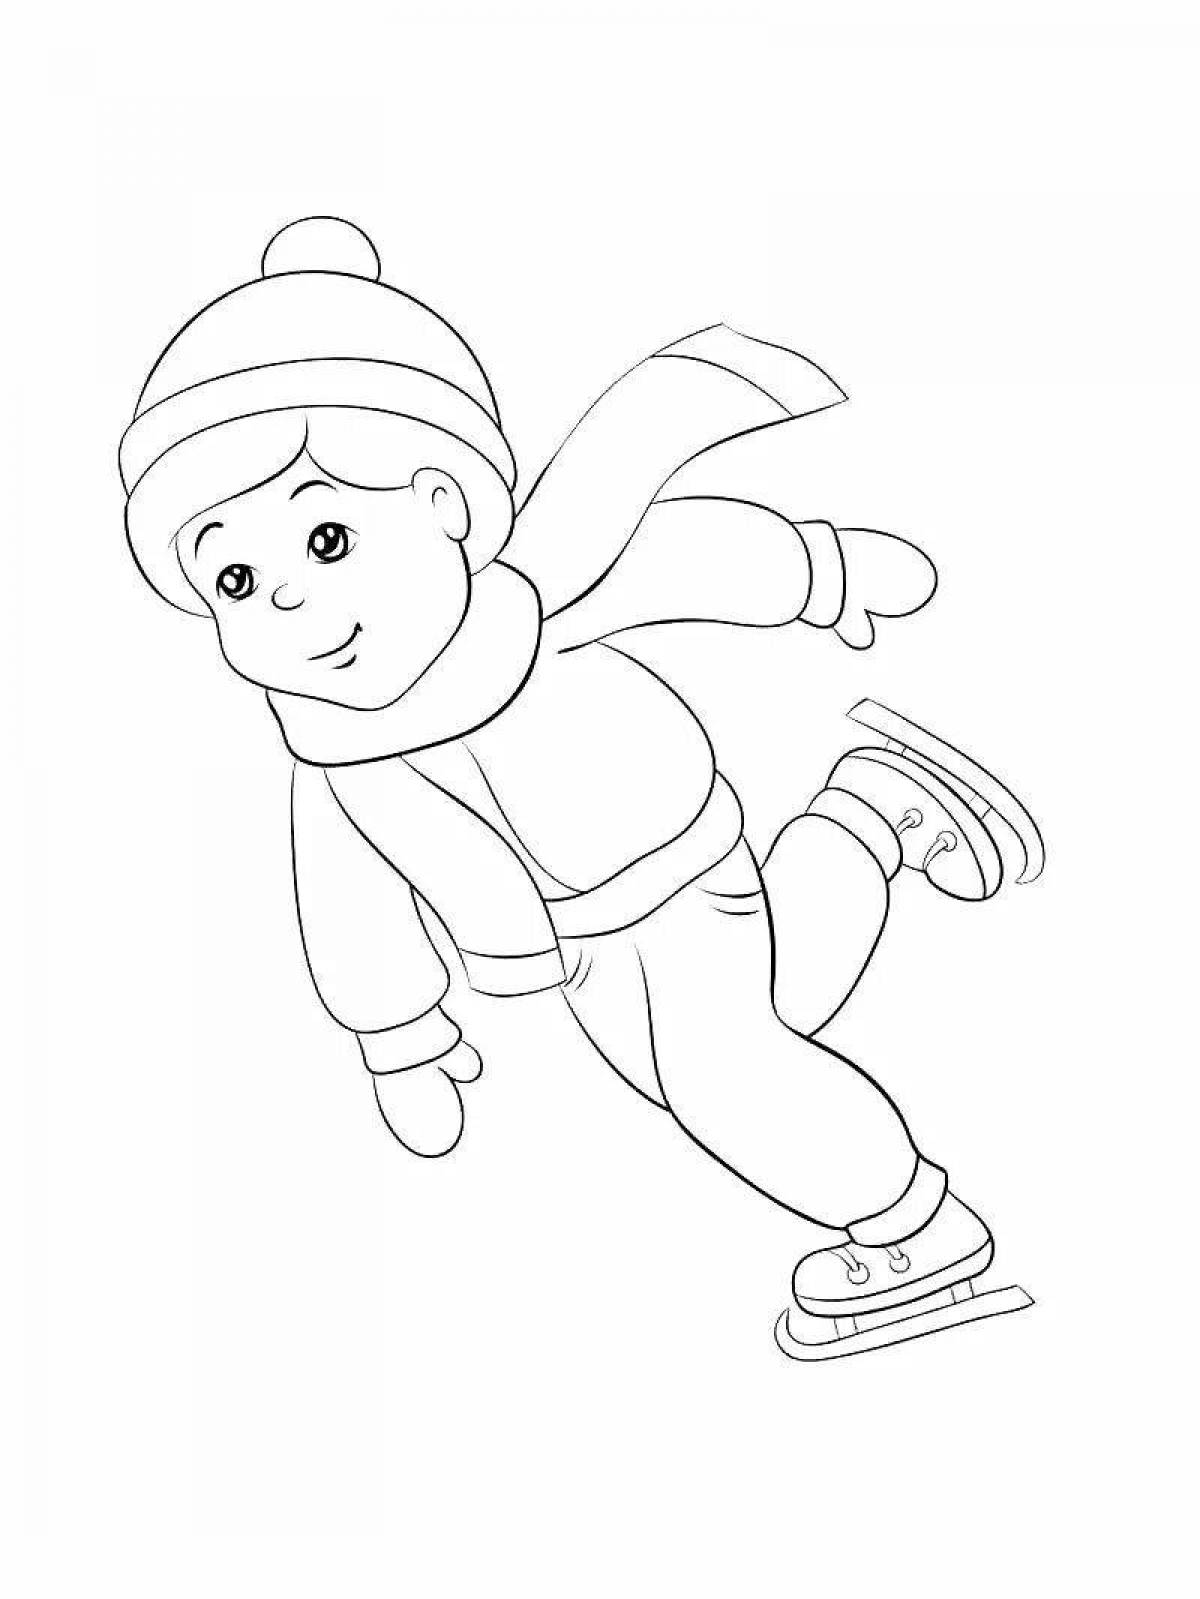 Fascinating winter sports coloring book